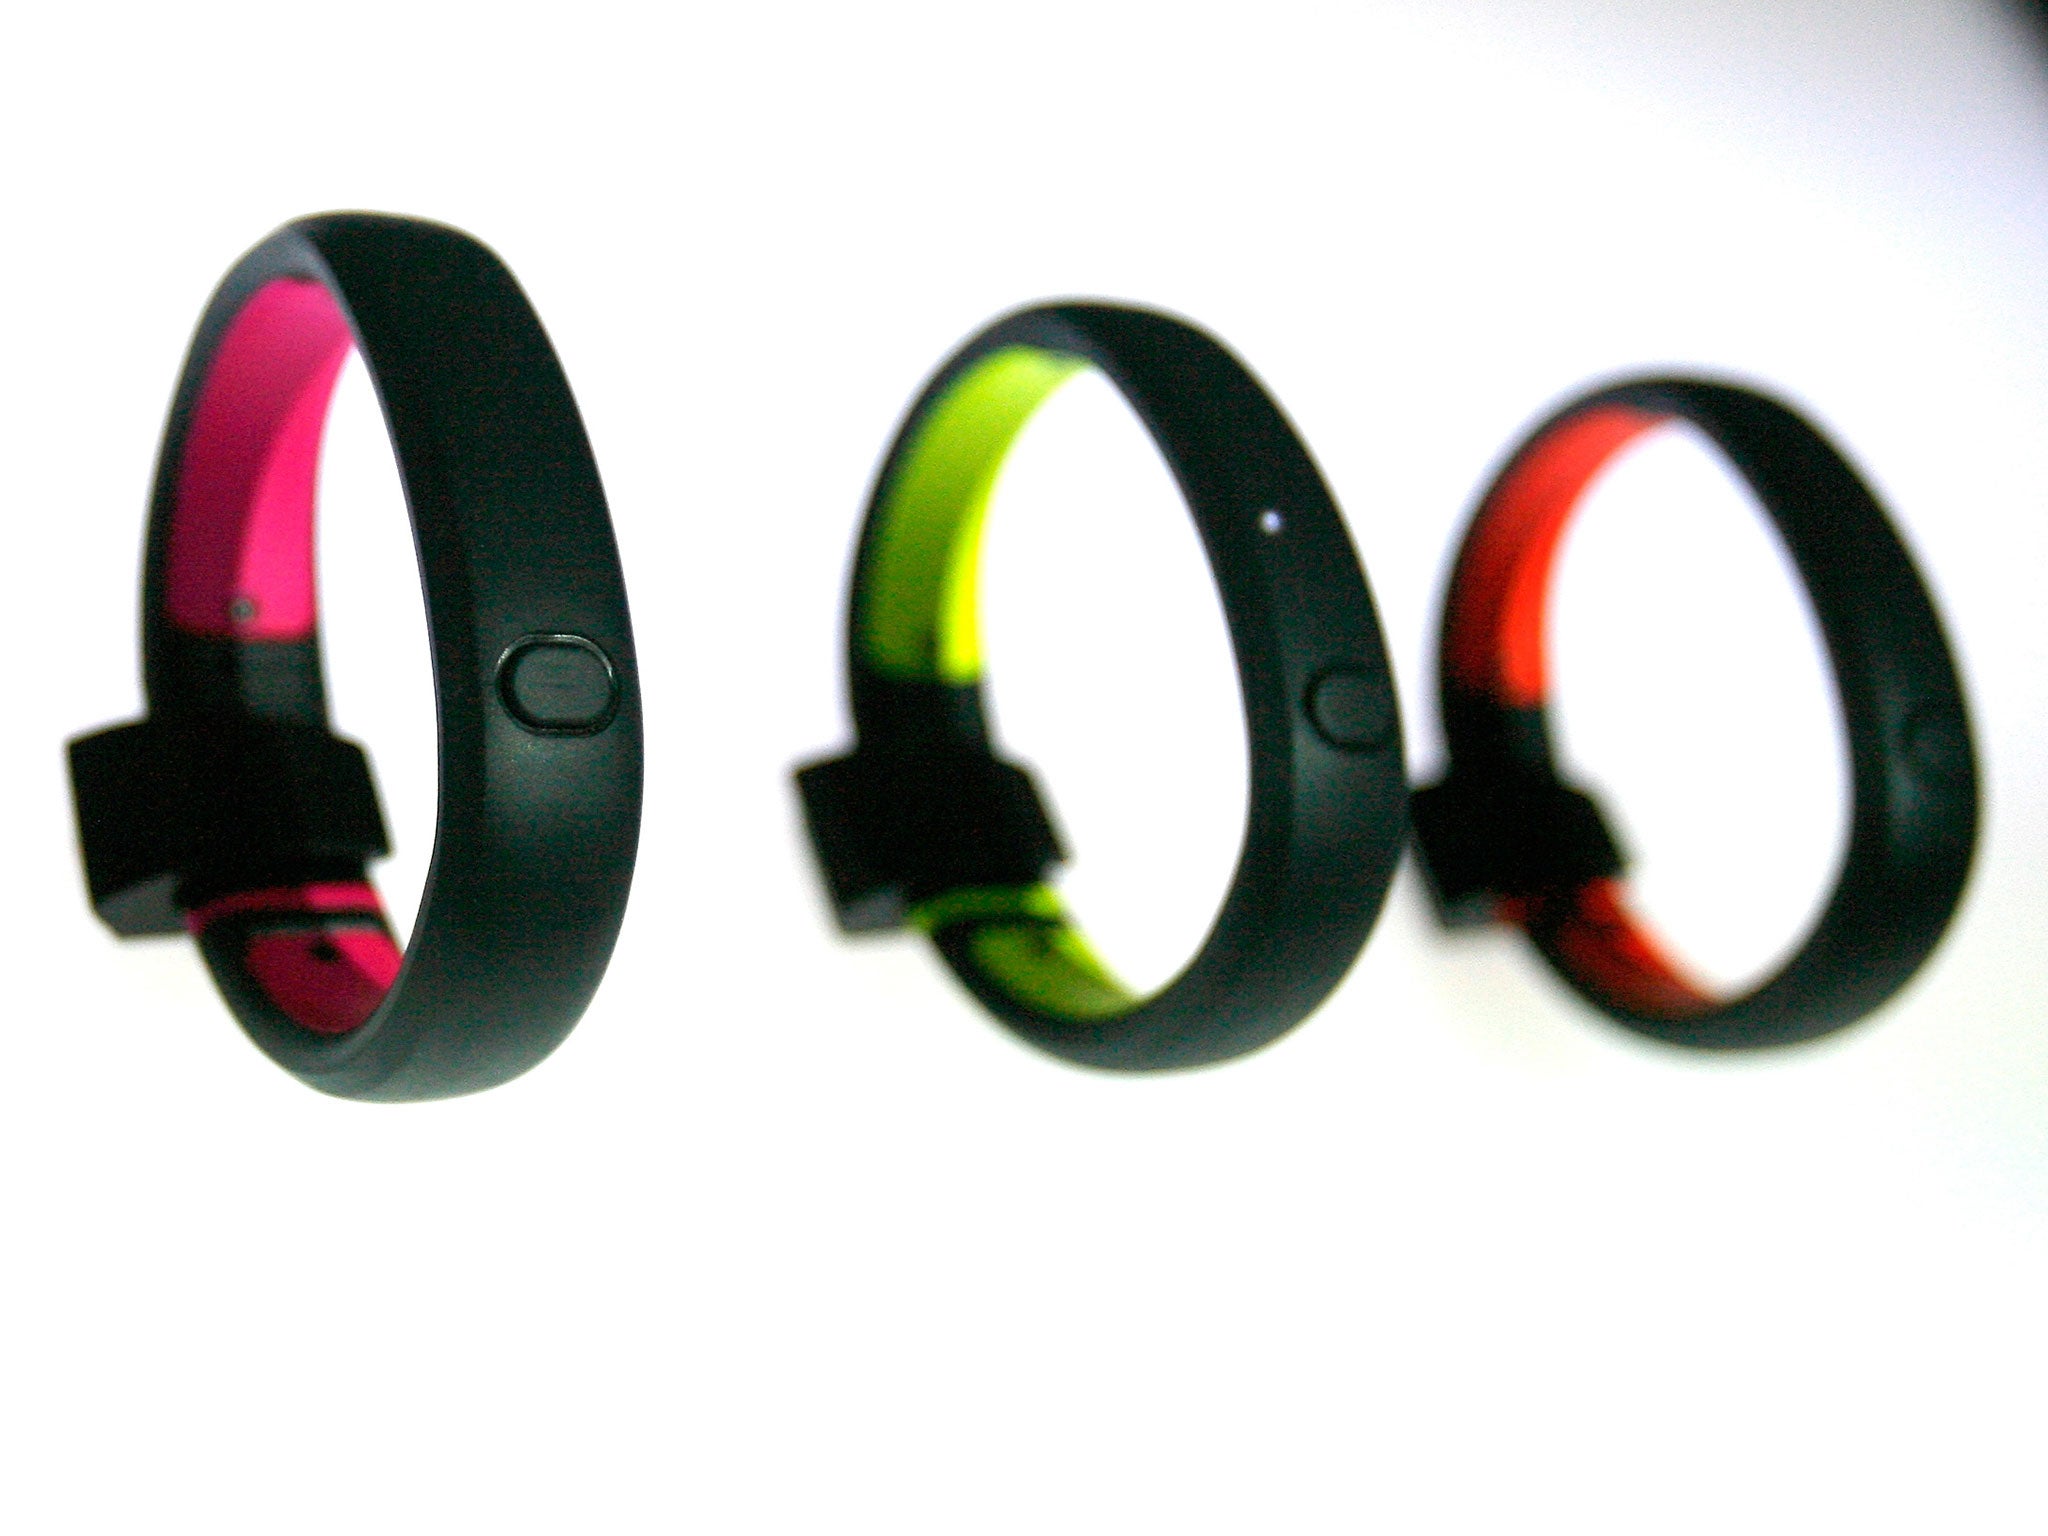 Nike Fuelbands do not accurately track how many steps a user is taking or how many calories they have burned